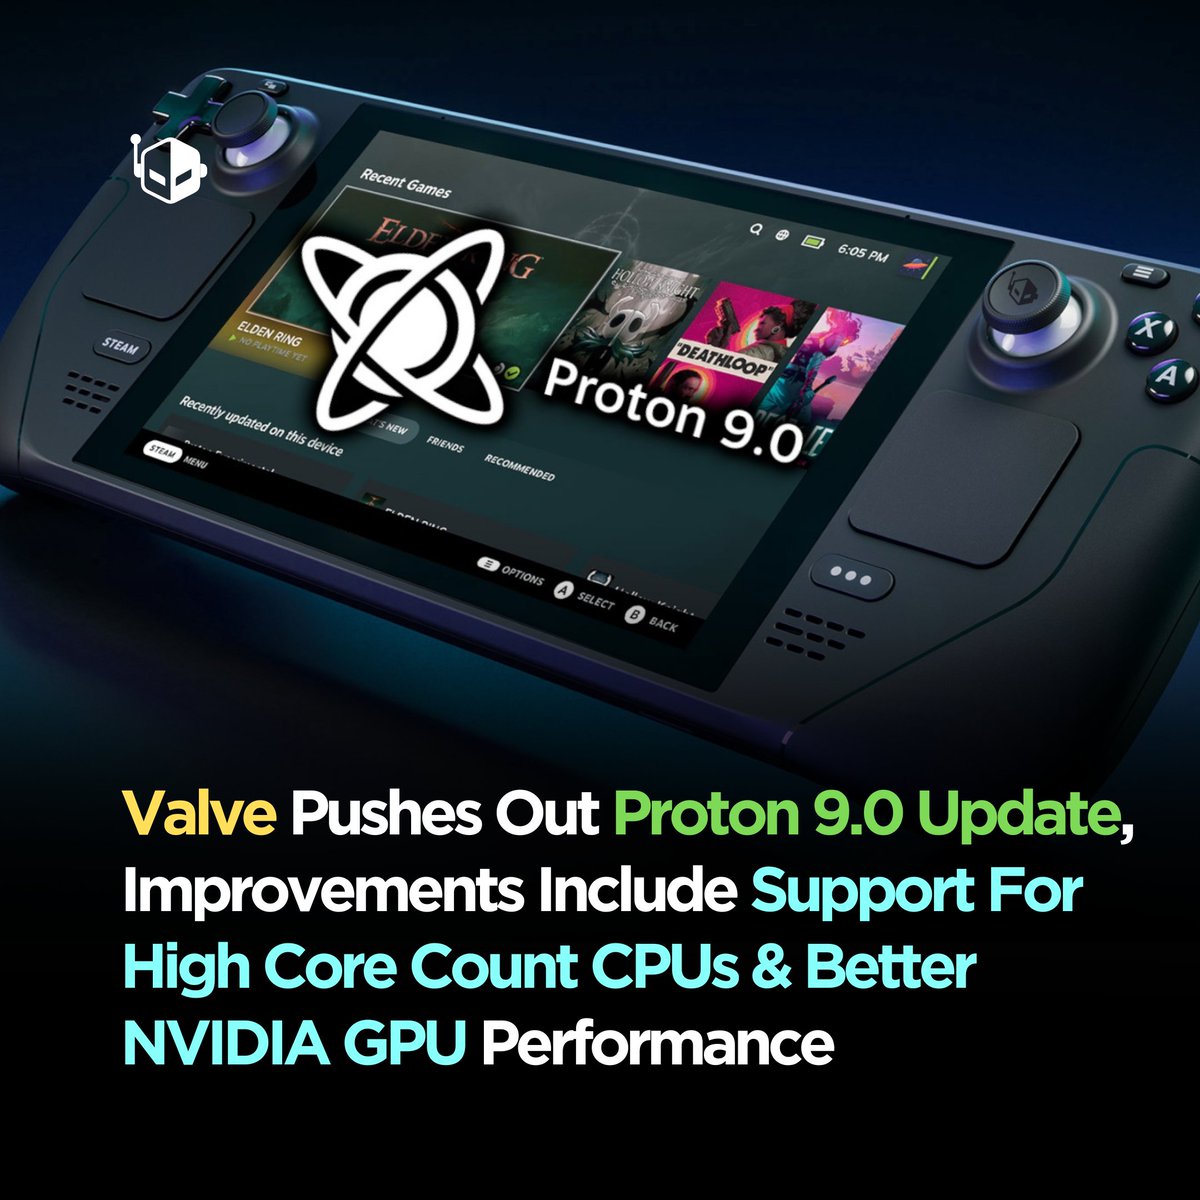 Valve has released its Proton 9.0 software update which adds improved support for NVIDIA GPUs and high core count CPUs. wccftech.com/valve-pushes-o…